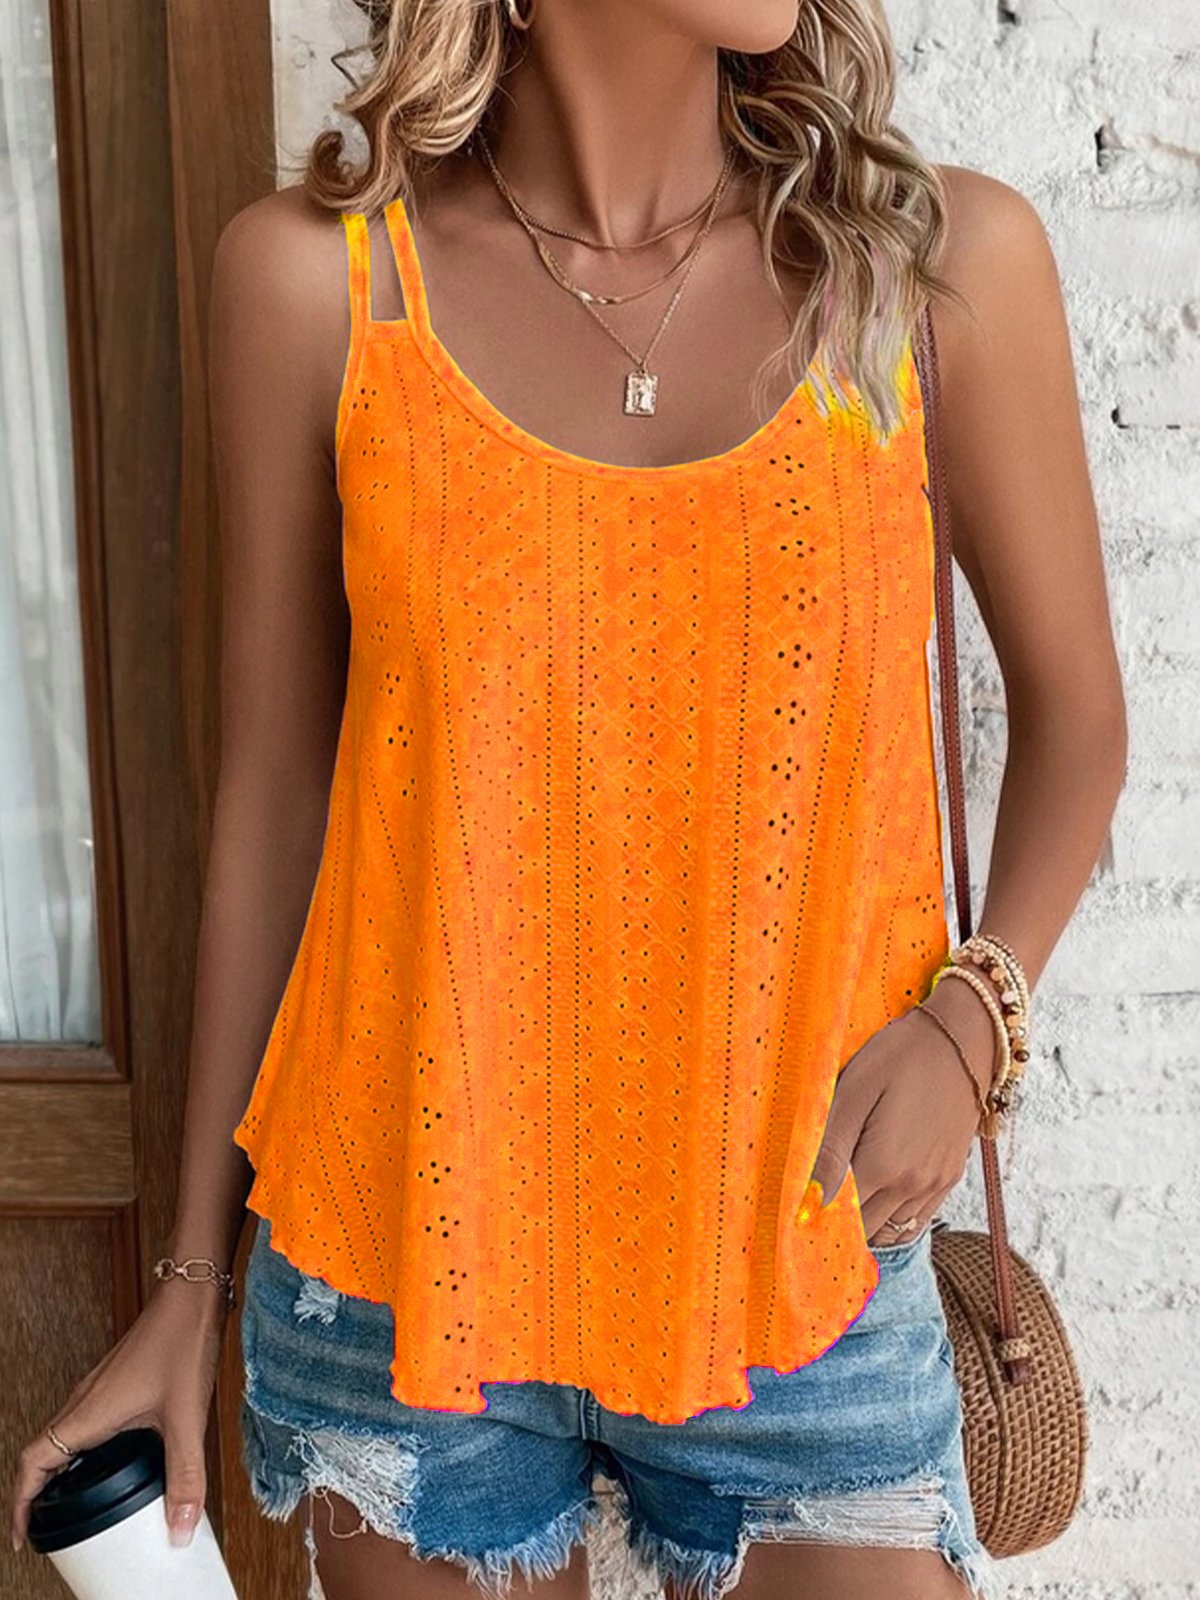 Women Casual Plain Summer Sleveness Eyelet Embroidery Tank Top Cami Top